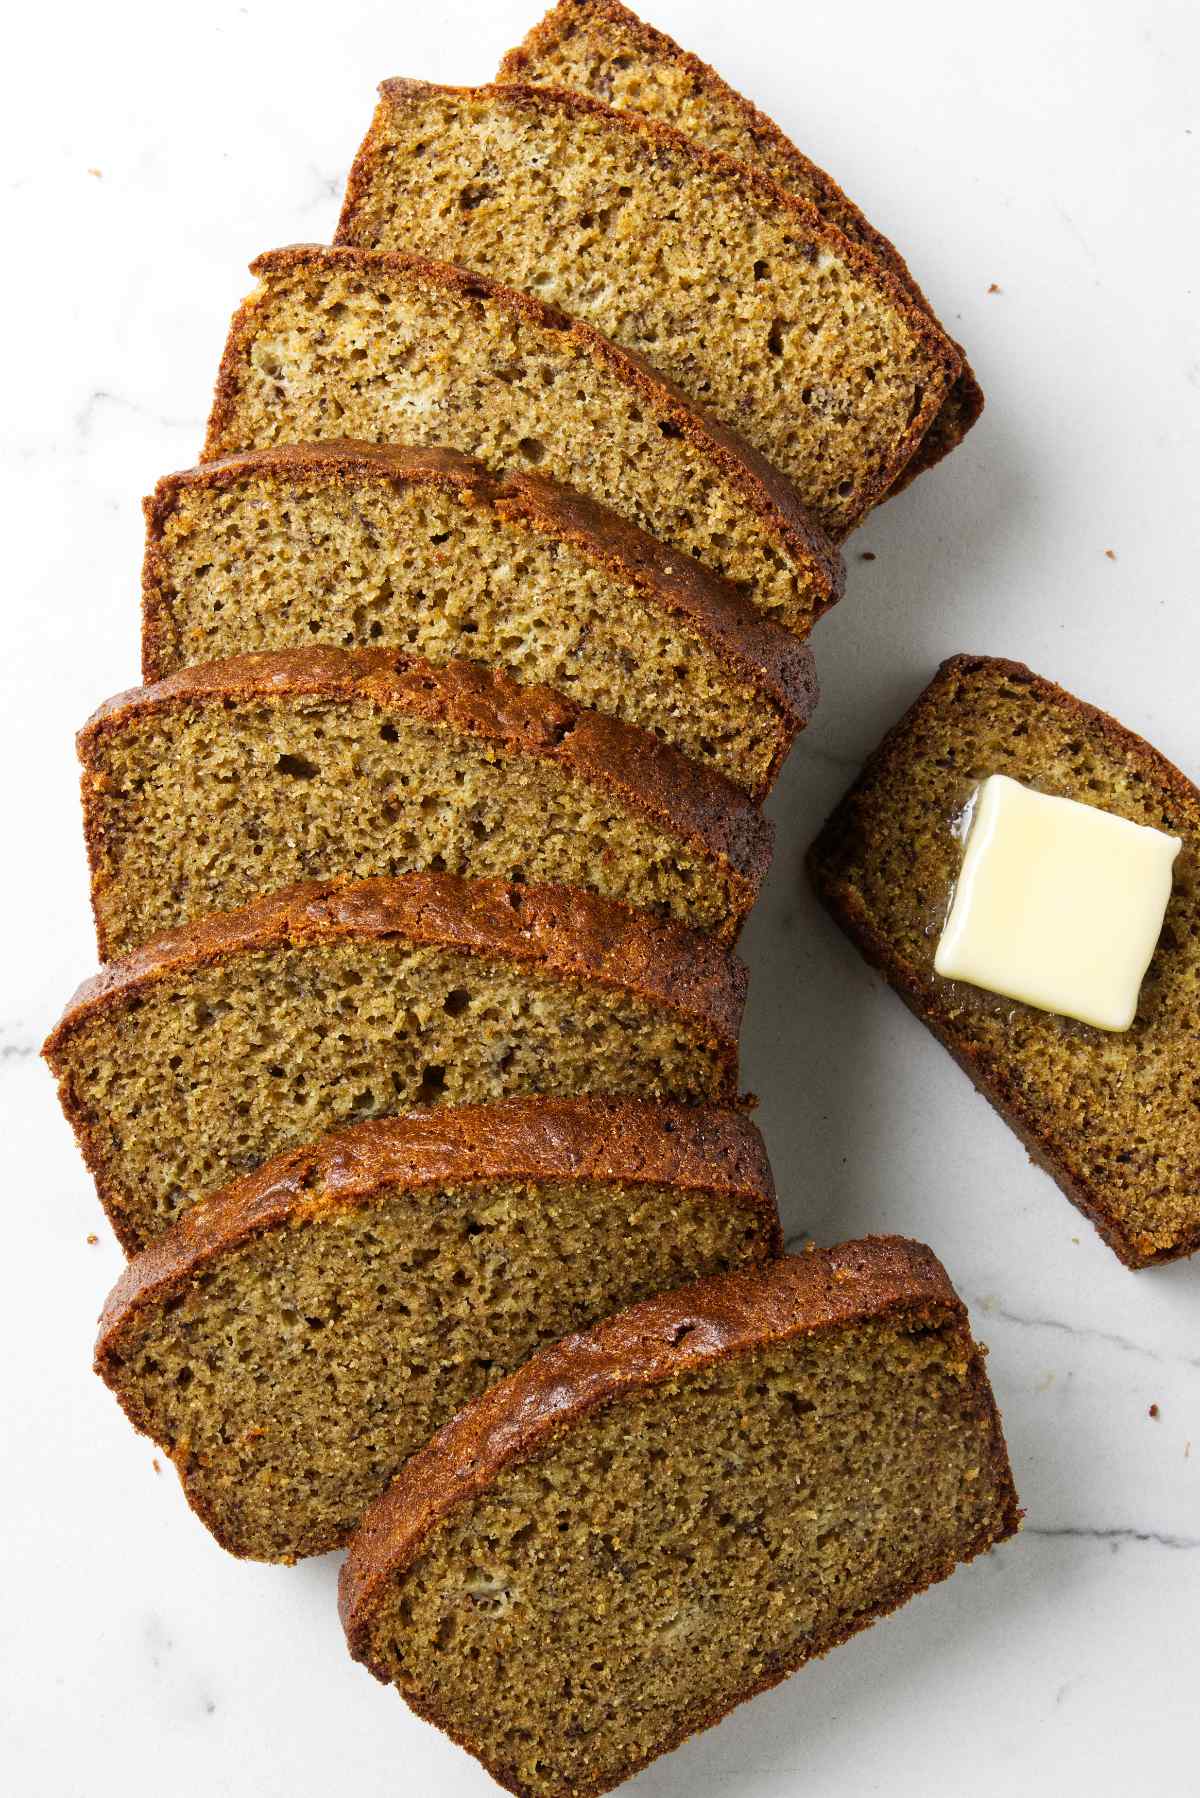 Slices of banana bread on a counter.